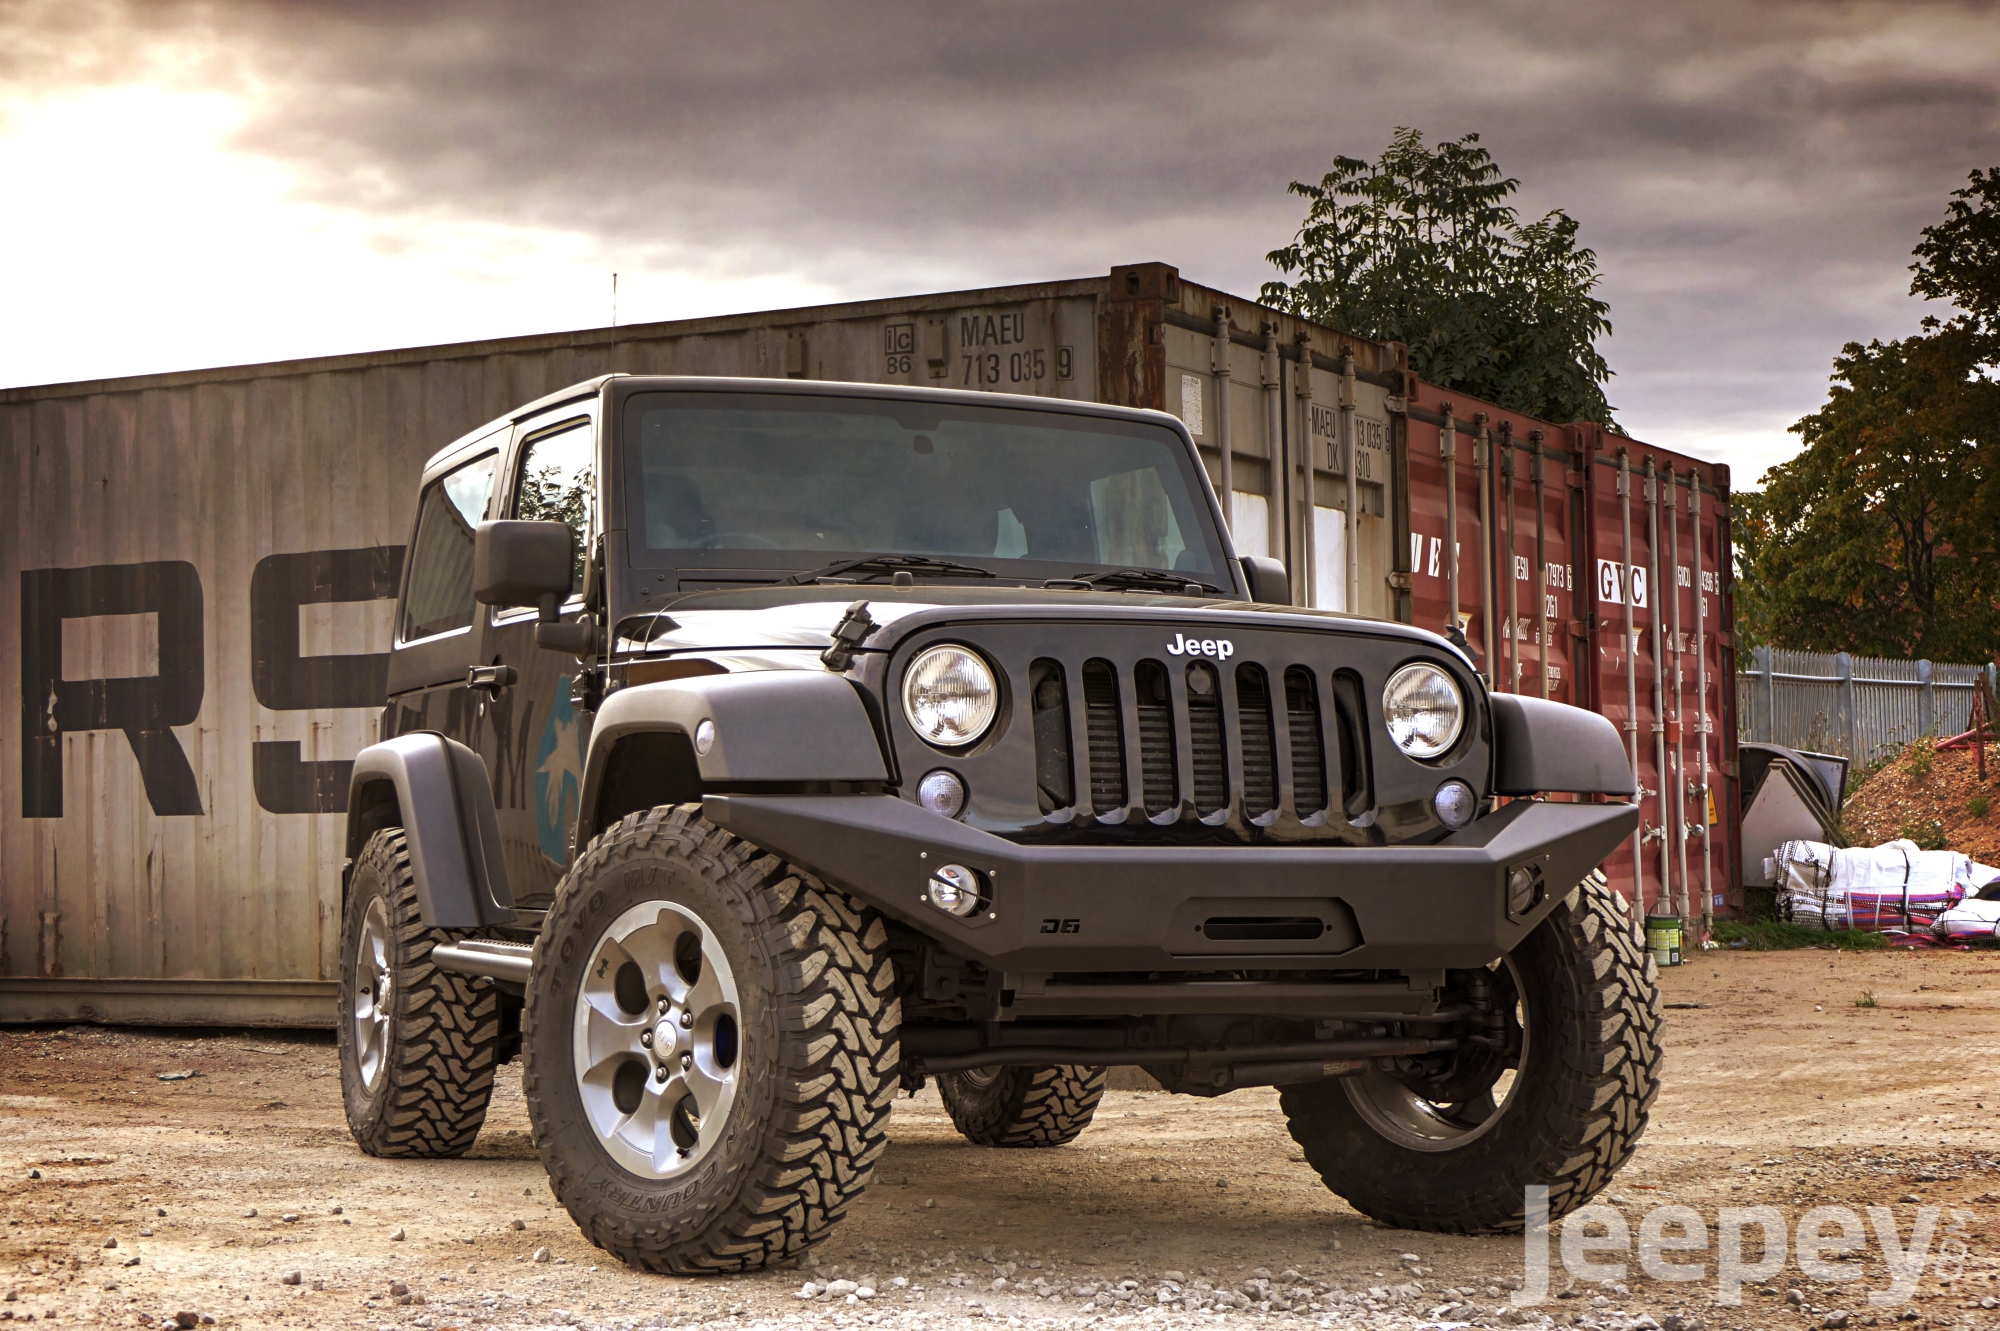 SOLD - Jeep Wrangler  Sport 2011 | Jeepey - Jeep parts, spares and  accessories